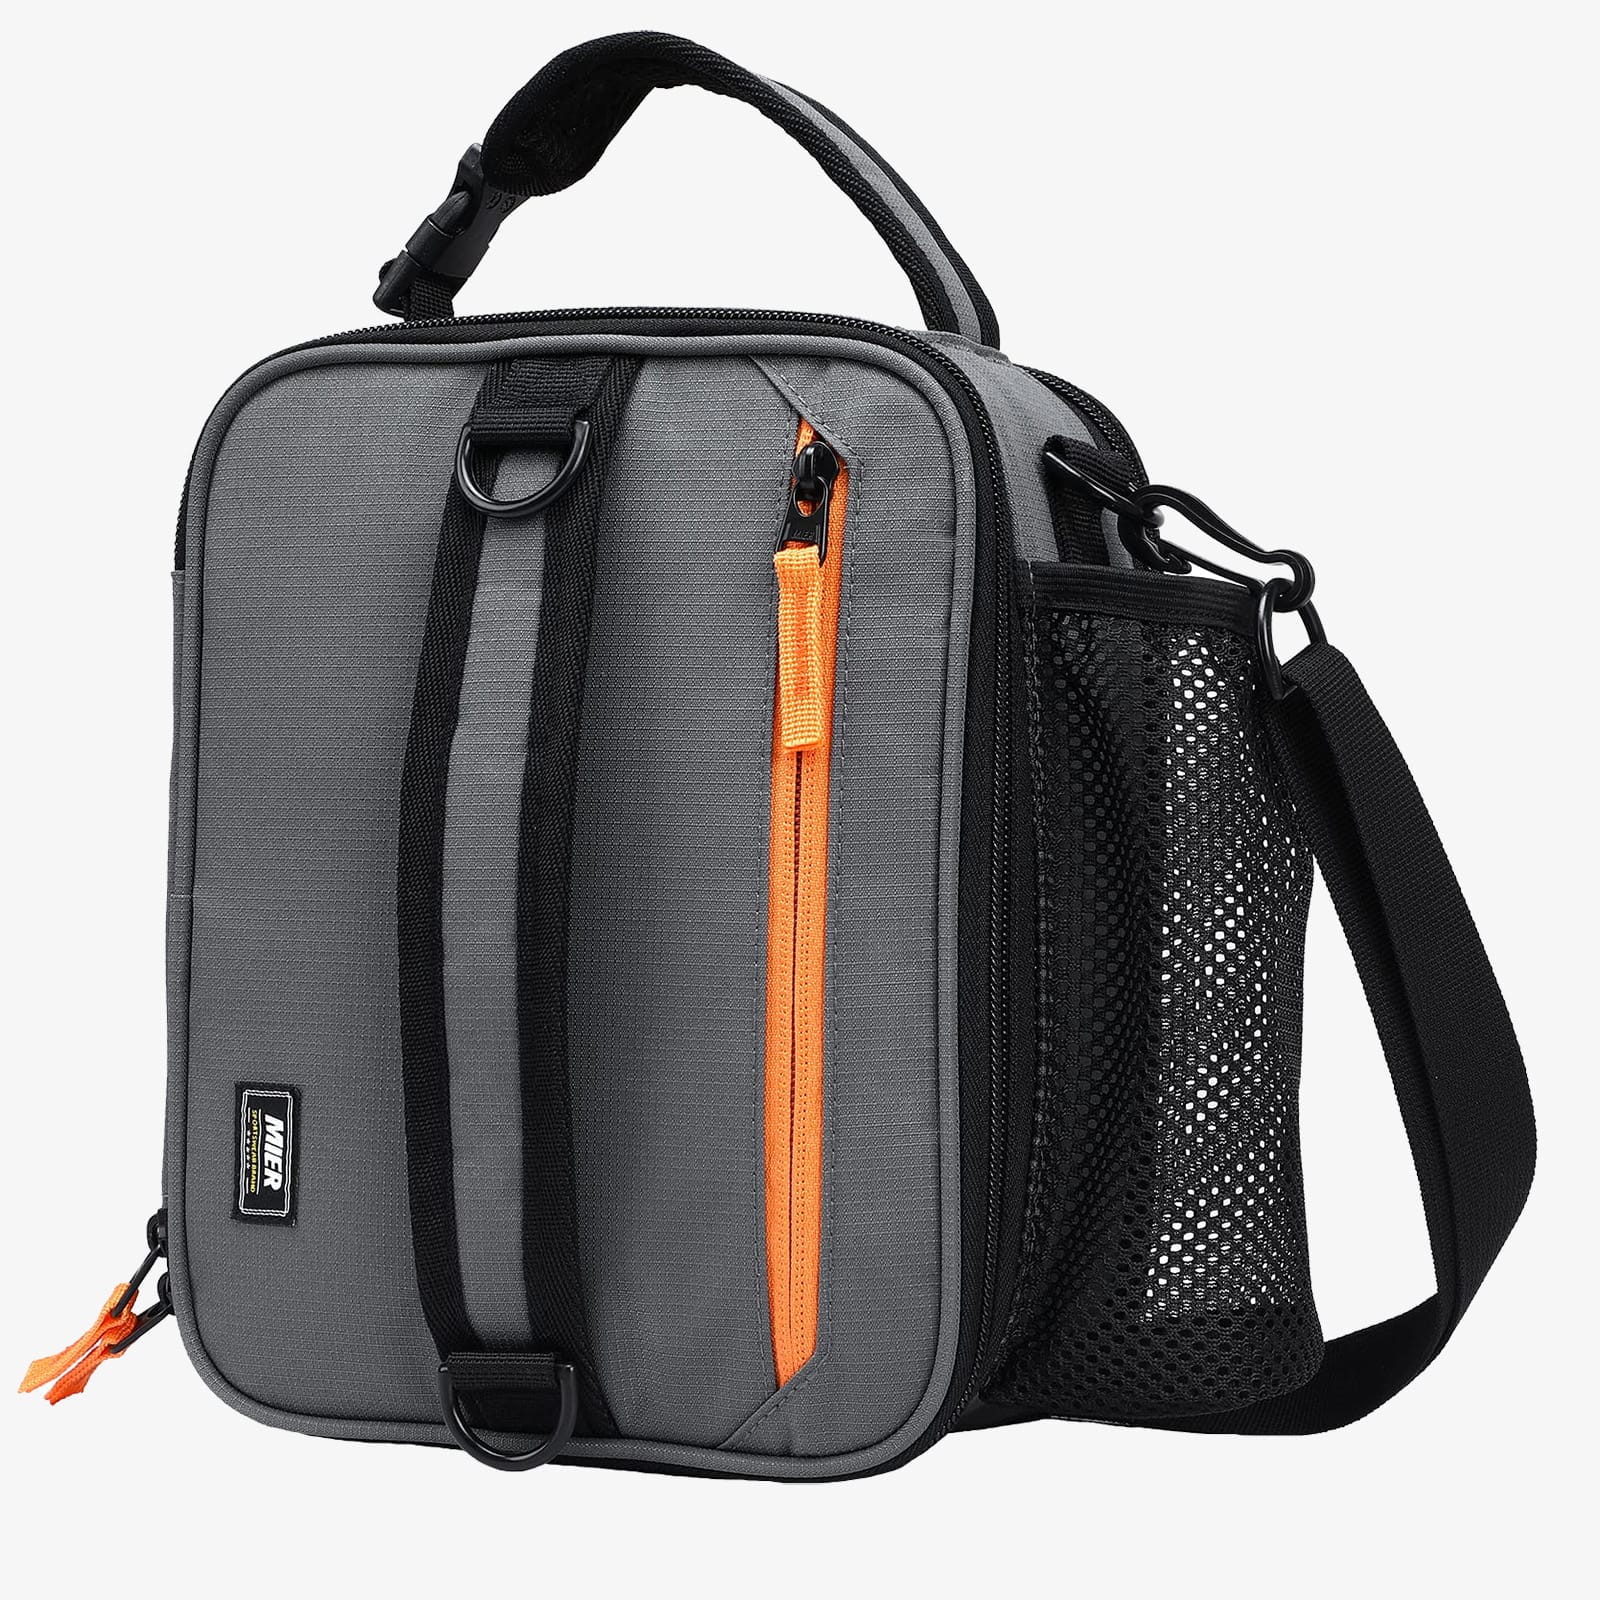 Expandable Lunch Bag Insulated Lunch Box for Men Boys Teens Adult Lunch Bag Grey Orange MIER